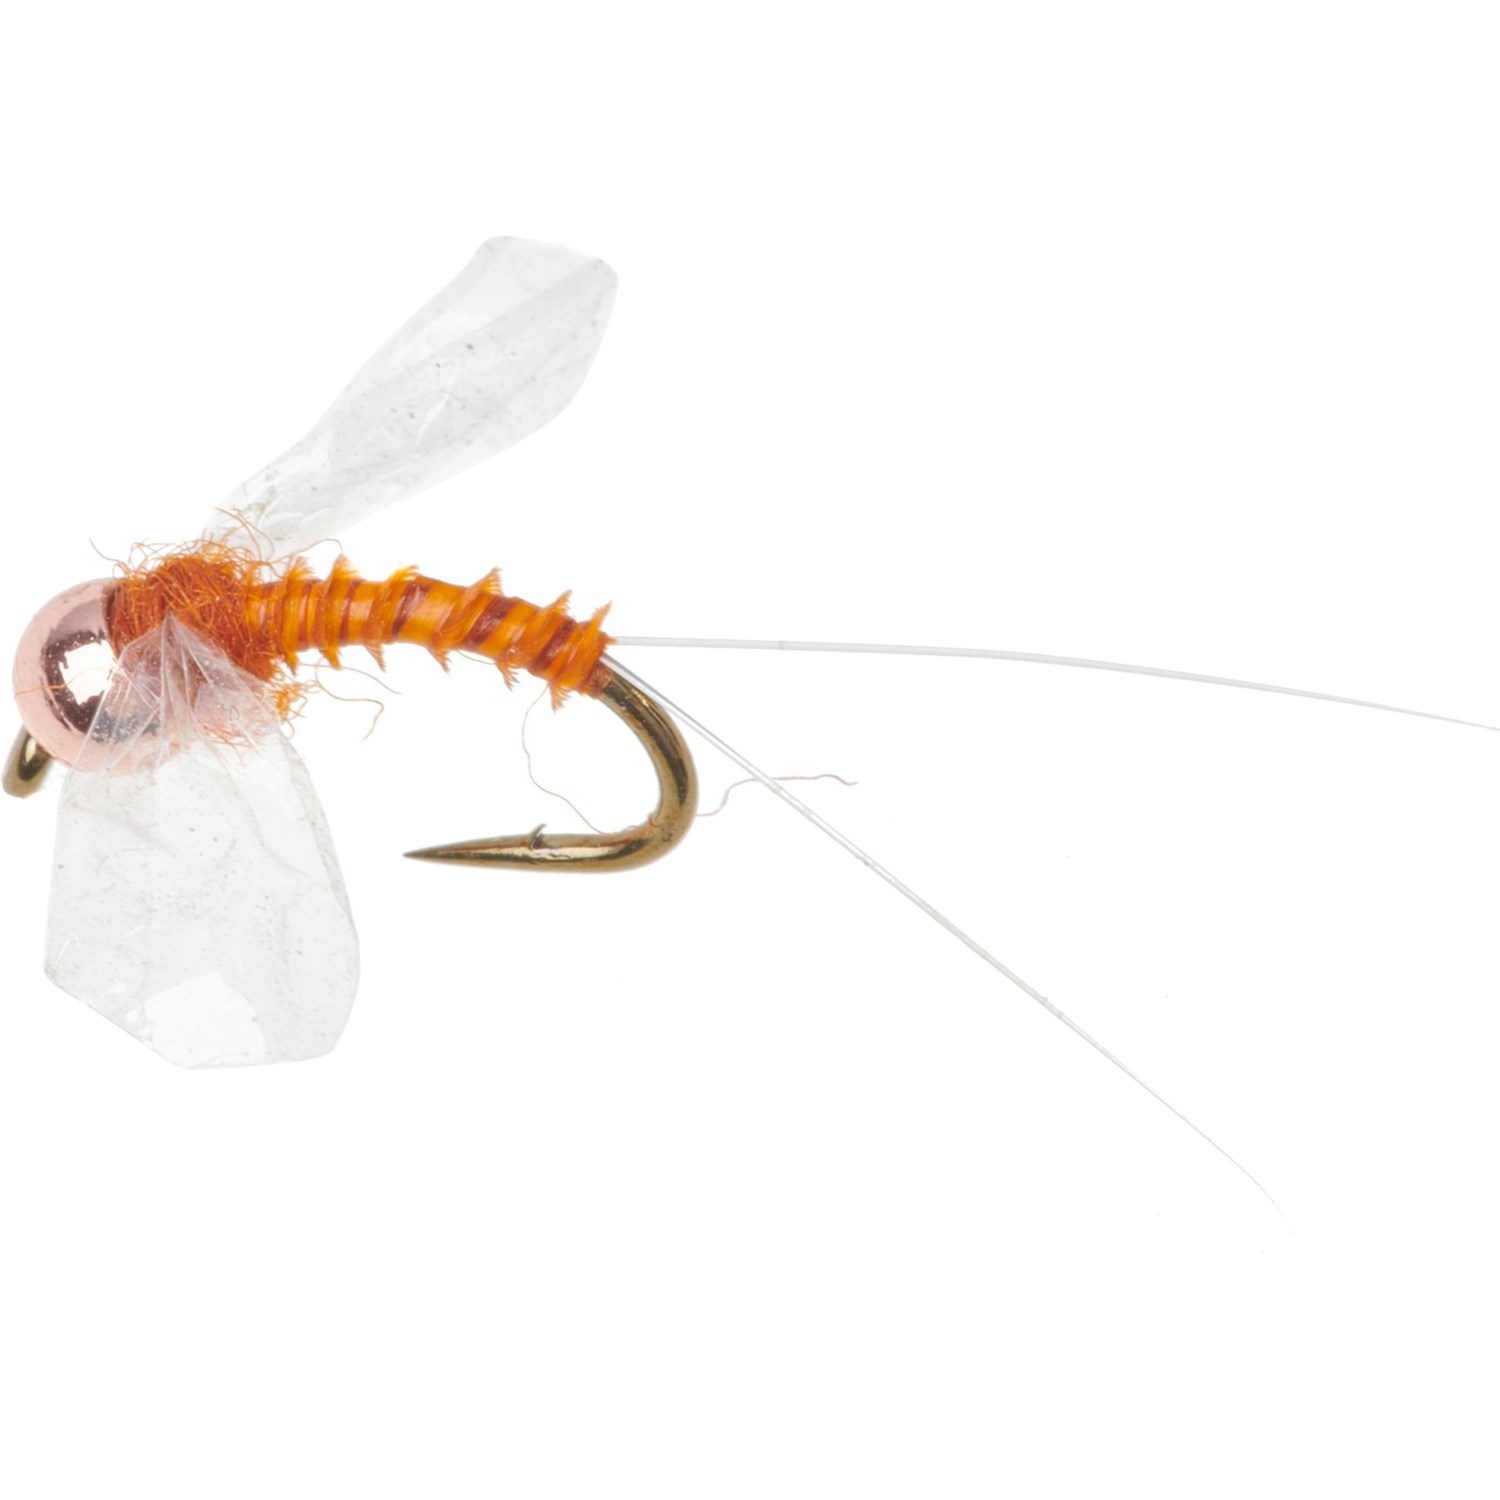 Montana Fly Company Gould’s Drowned Spinner Dry Fly - Dozen